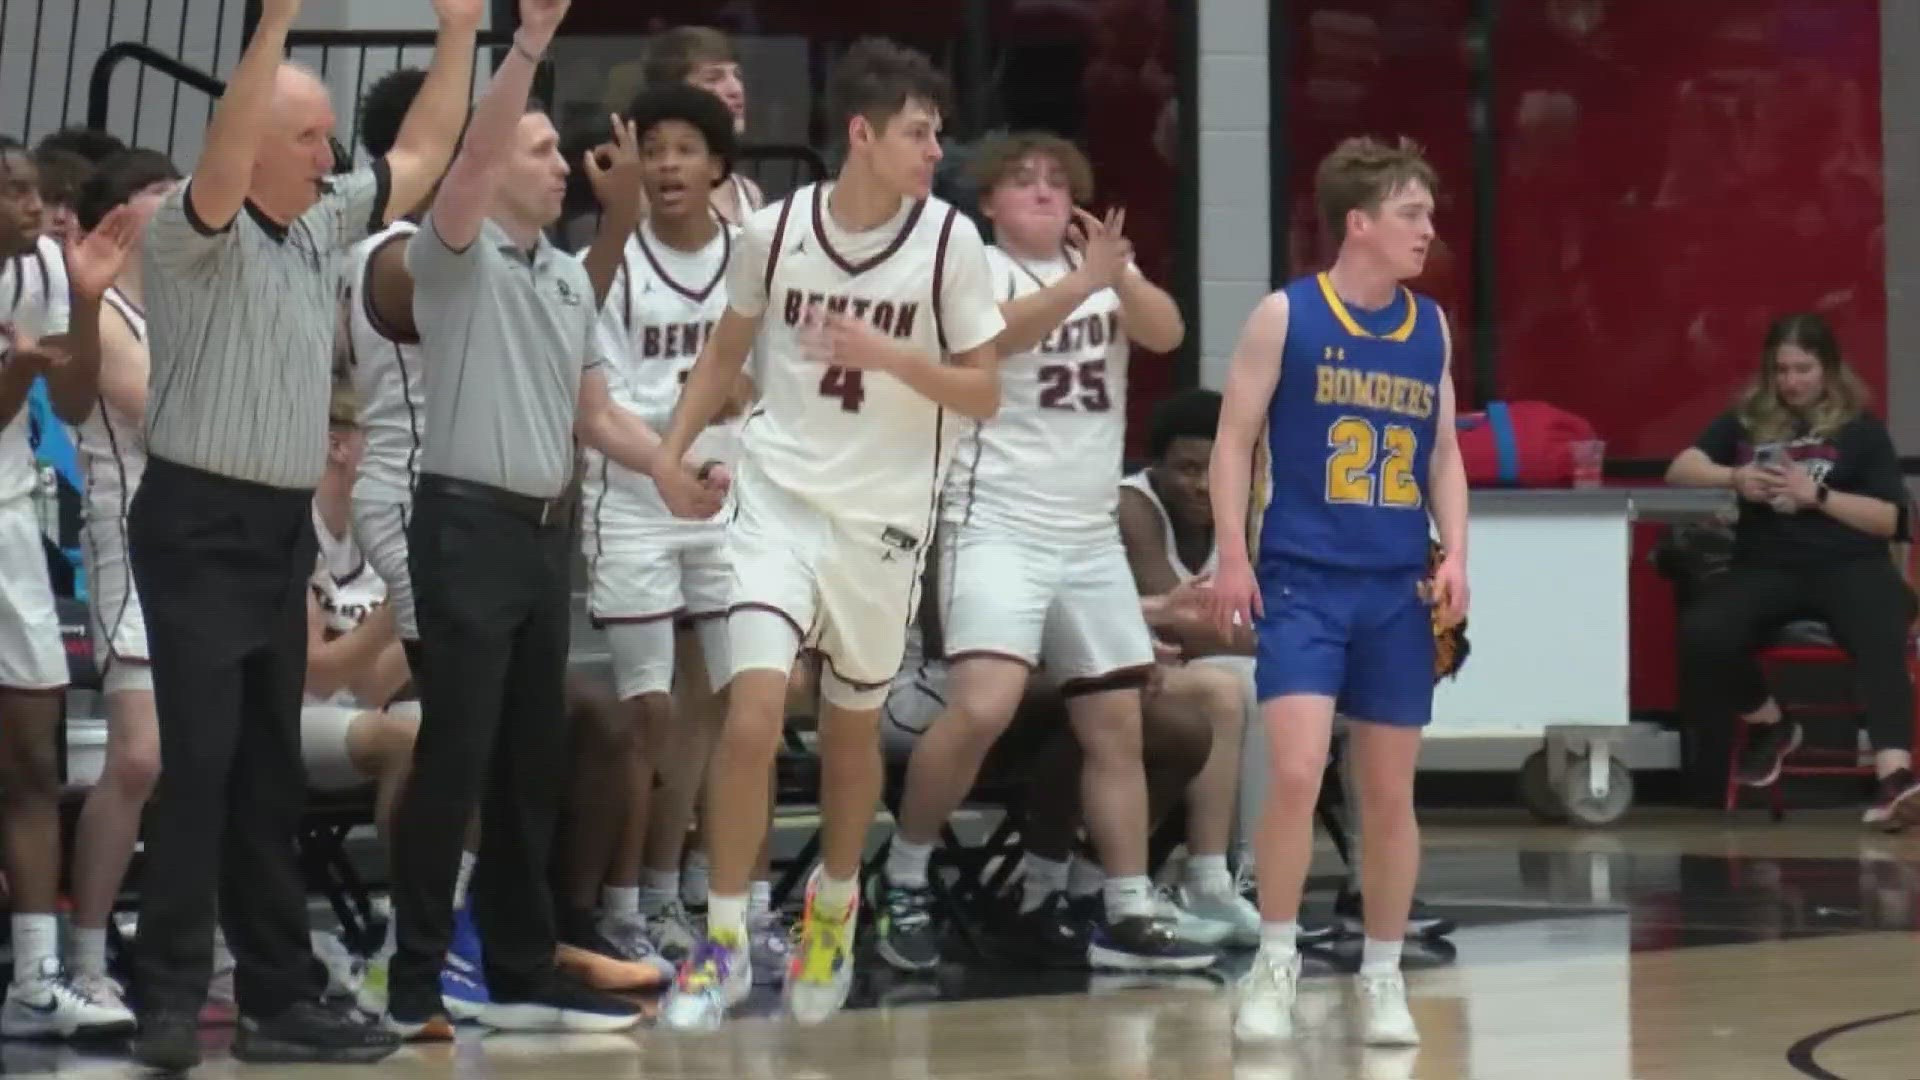 Benton took care of business against Mountain Home 60-38 to advance to the second round of the Class 5A boys state basketball tournament.